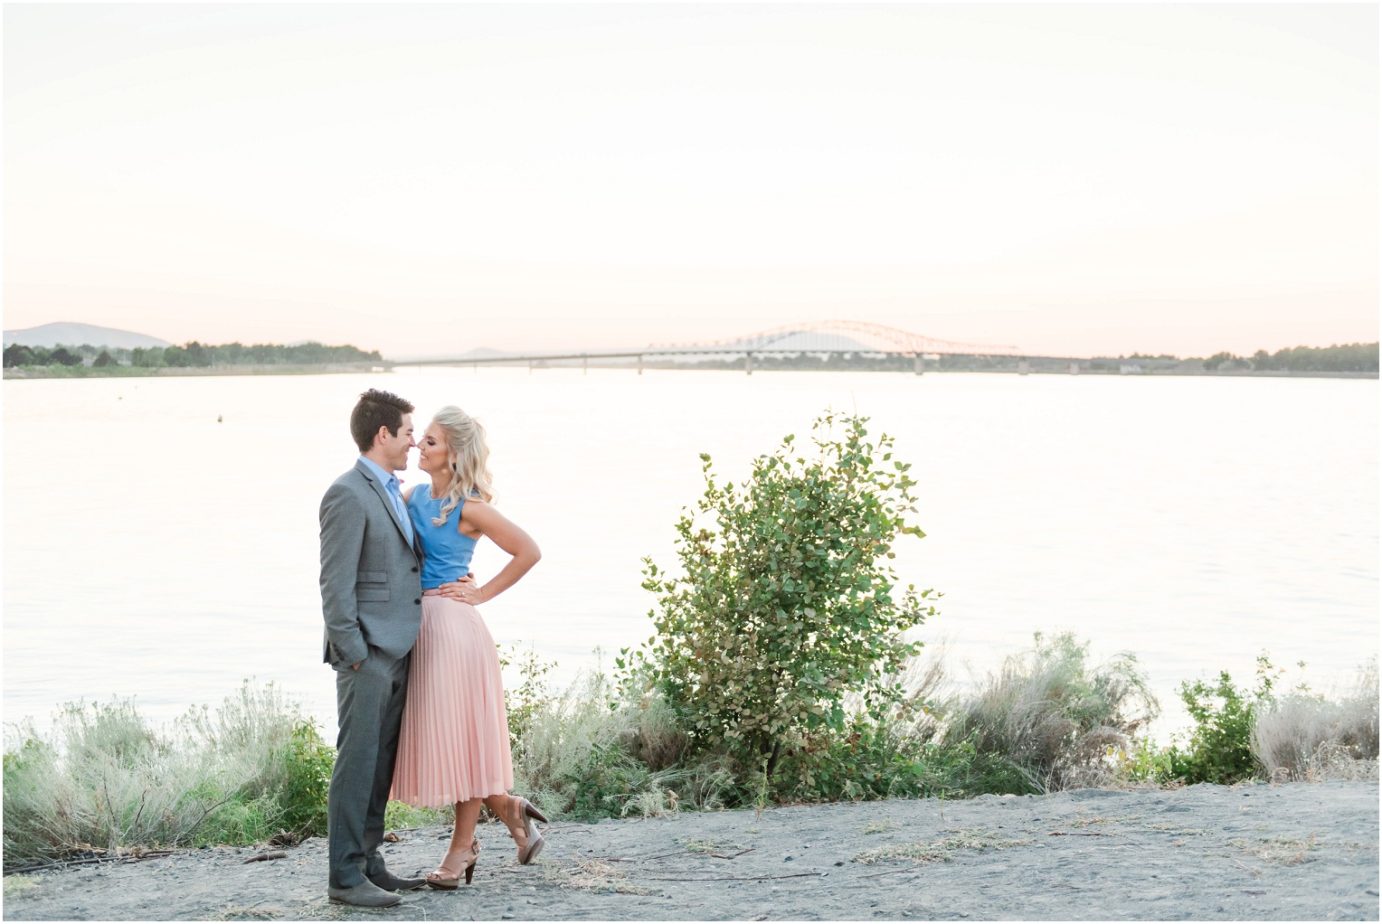 Clover Island Anniversary Session Kennewick WA Couple in front of the Blue bridge